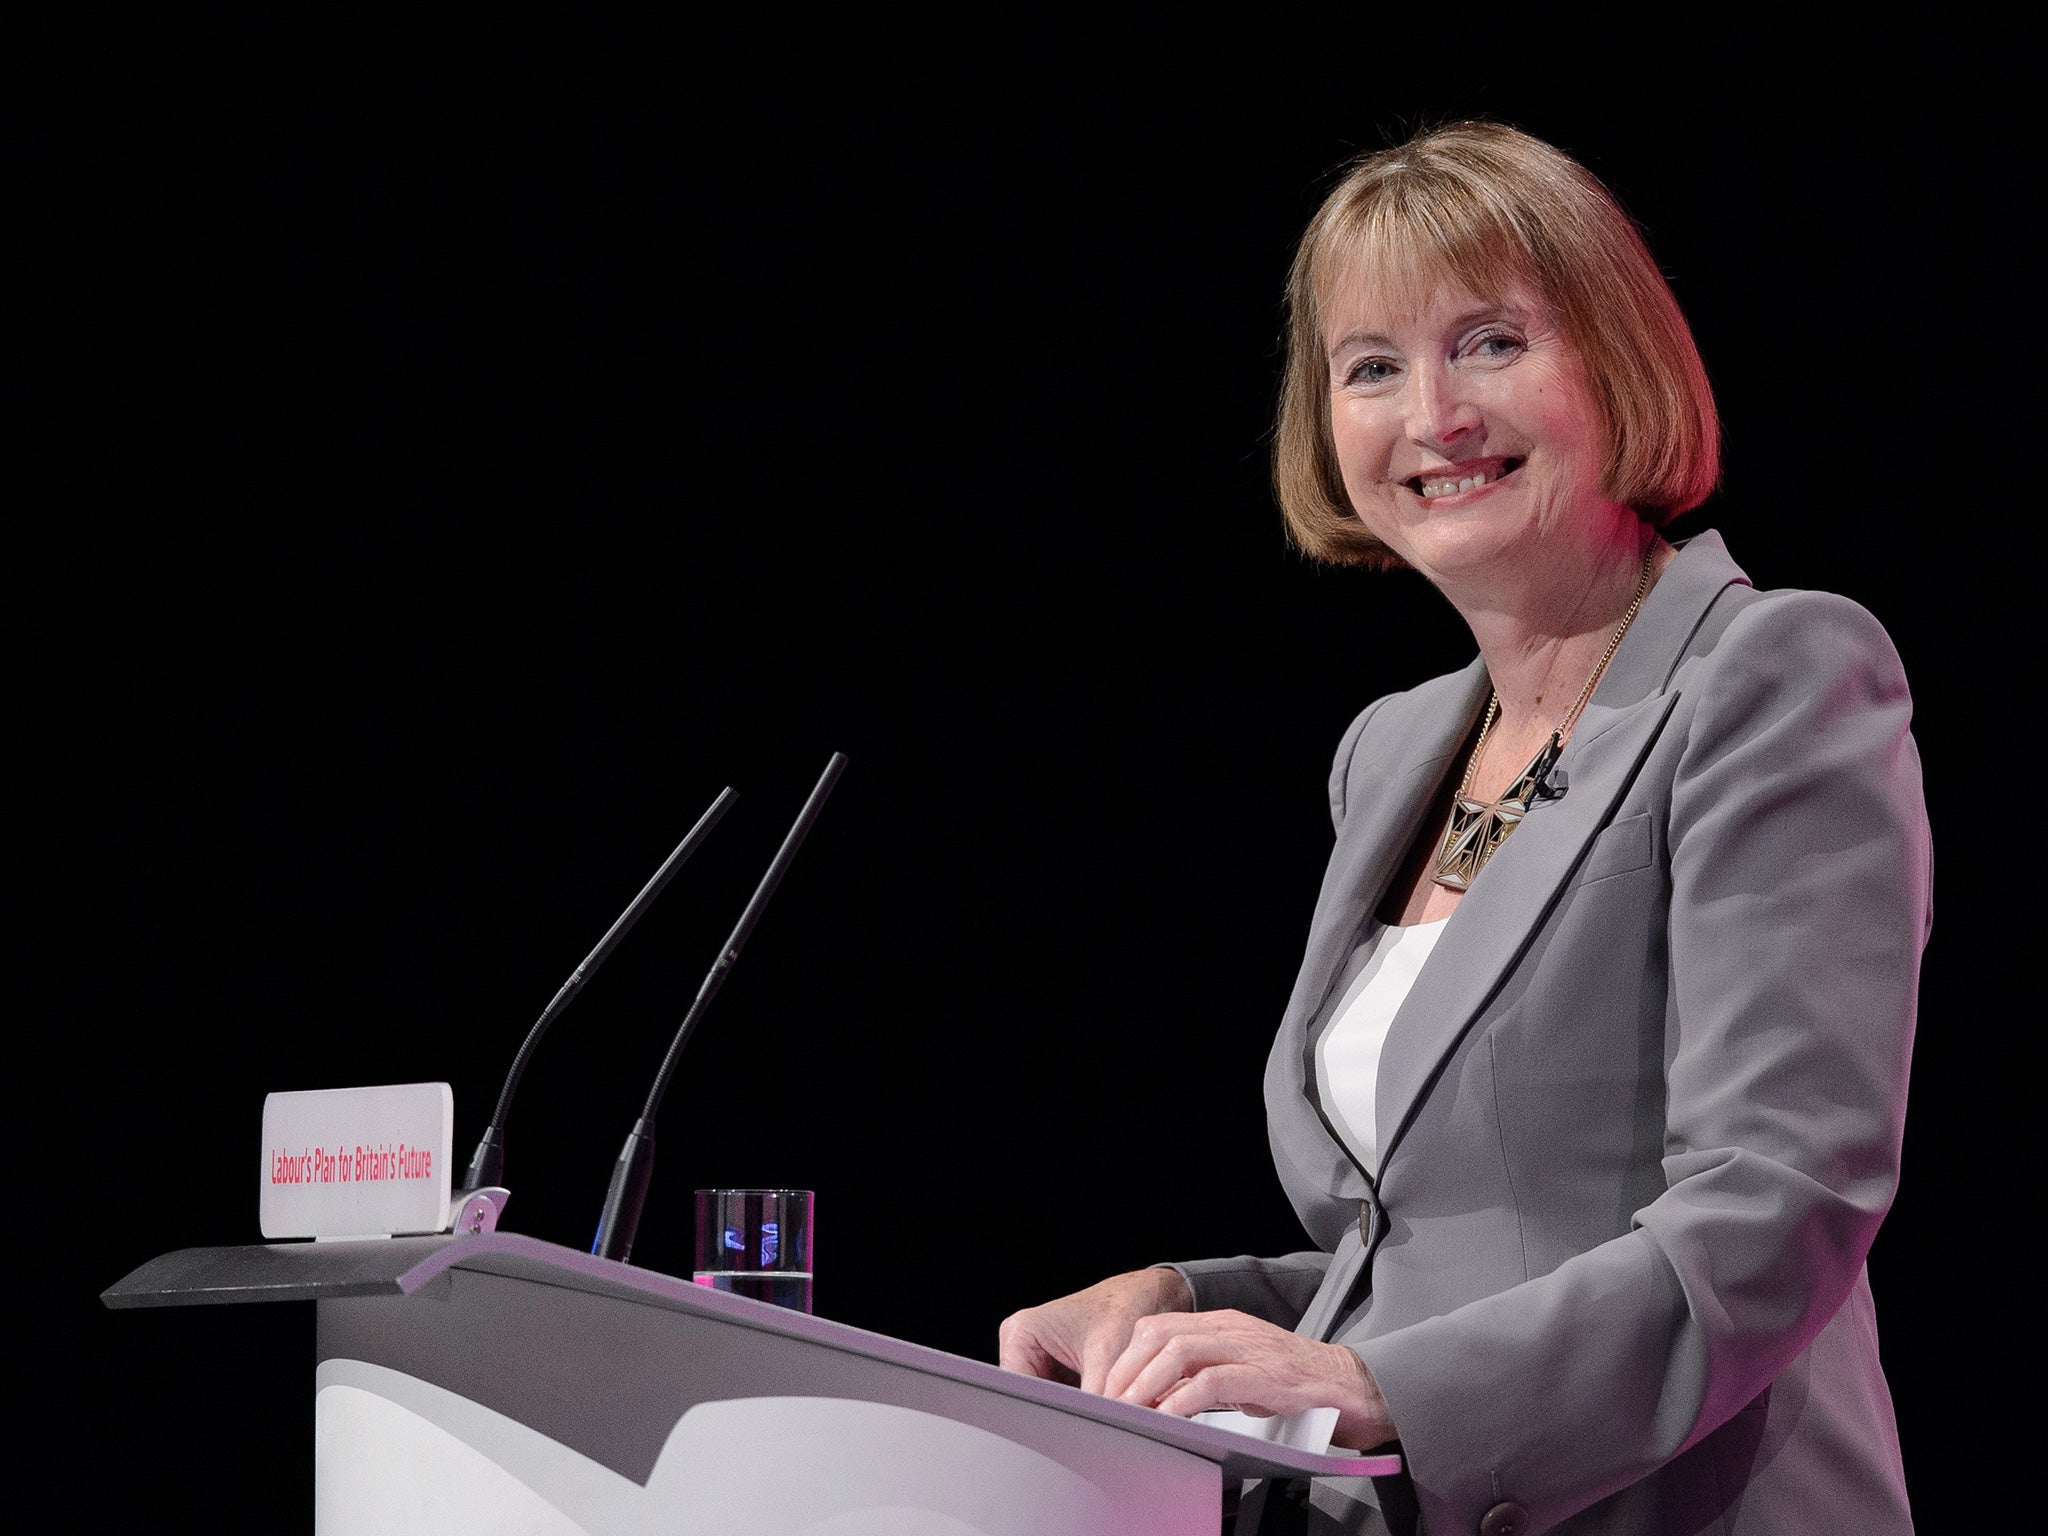 Harriet Harman has excelled as Labour's acting leader, showing decisiveness lacking in her predecessor